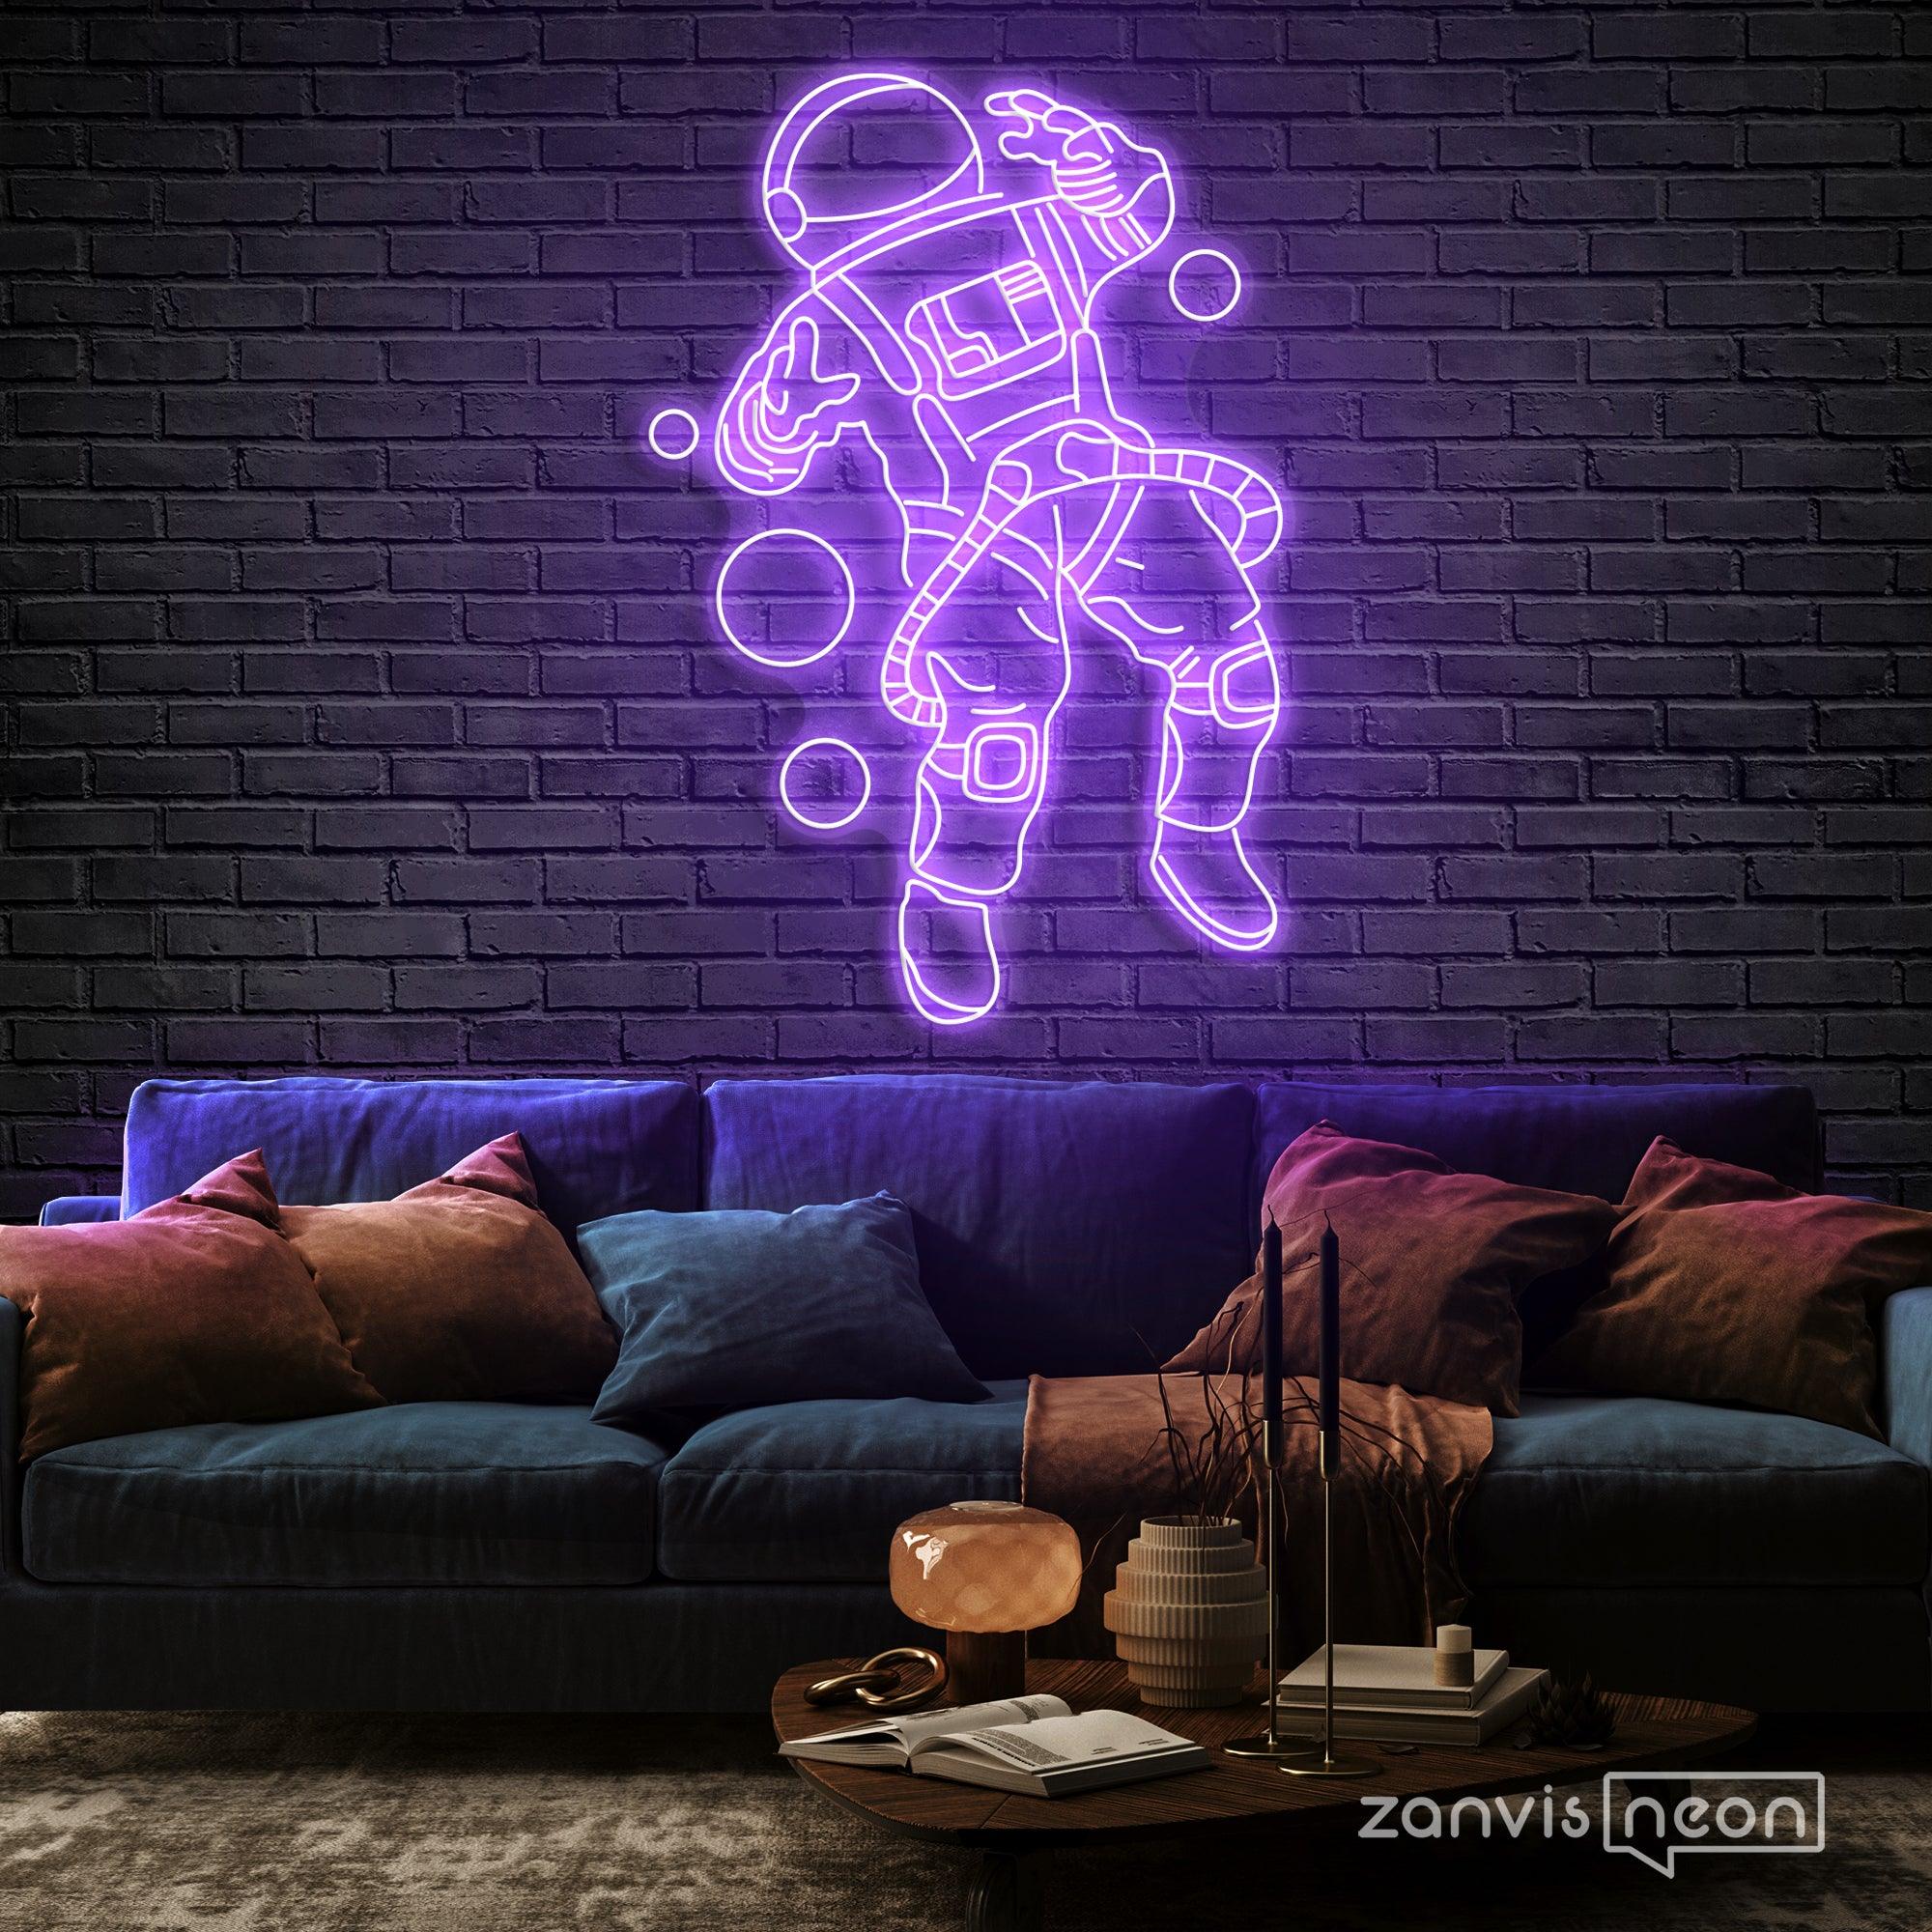 Astronaut in Space Neon Sign - Custom Neon Signs | LED Neon Signs | Zanvis Neon®